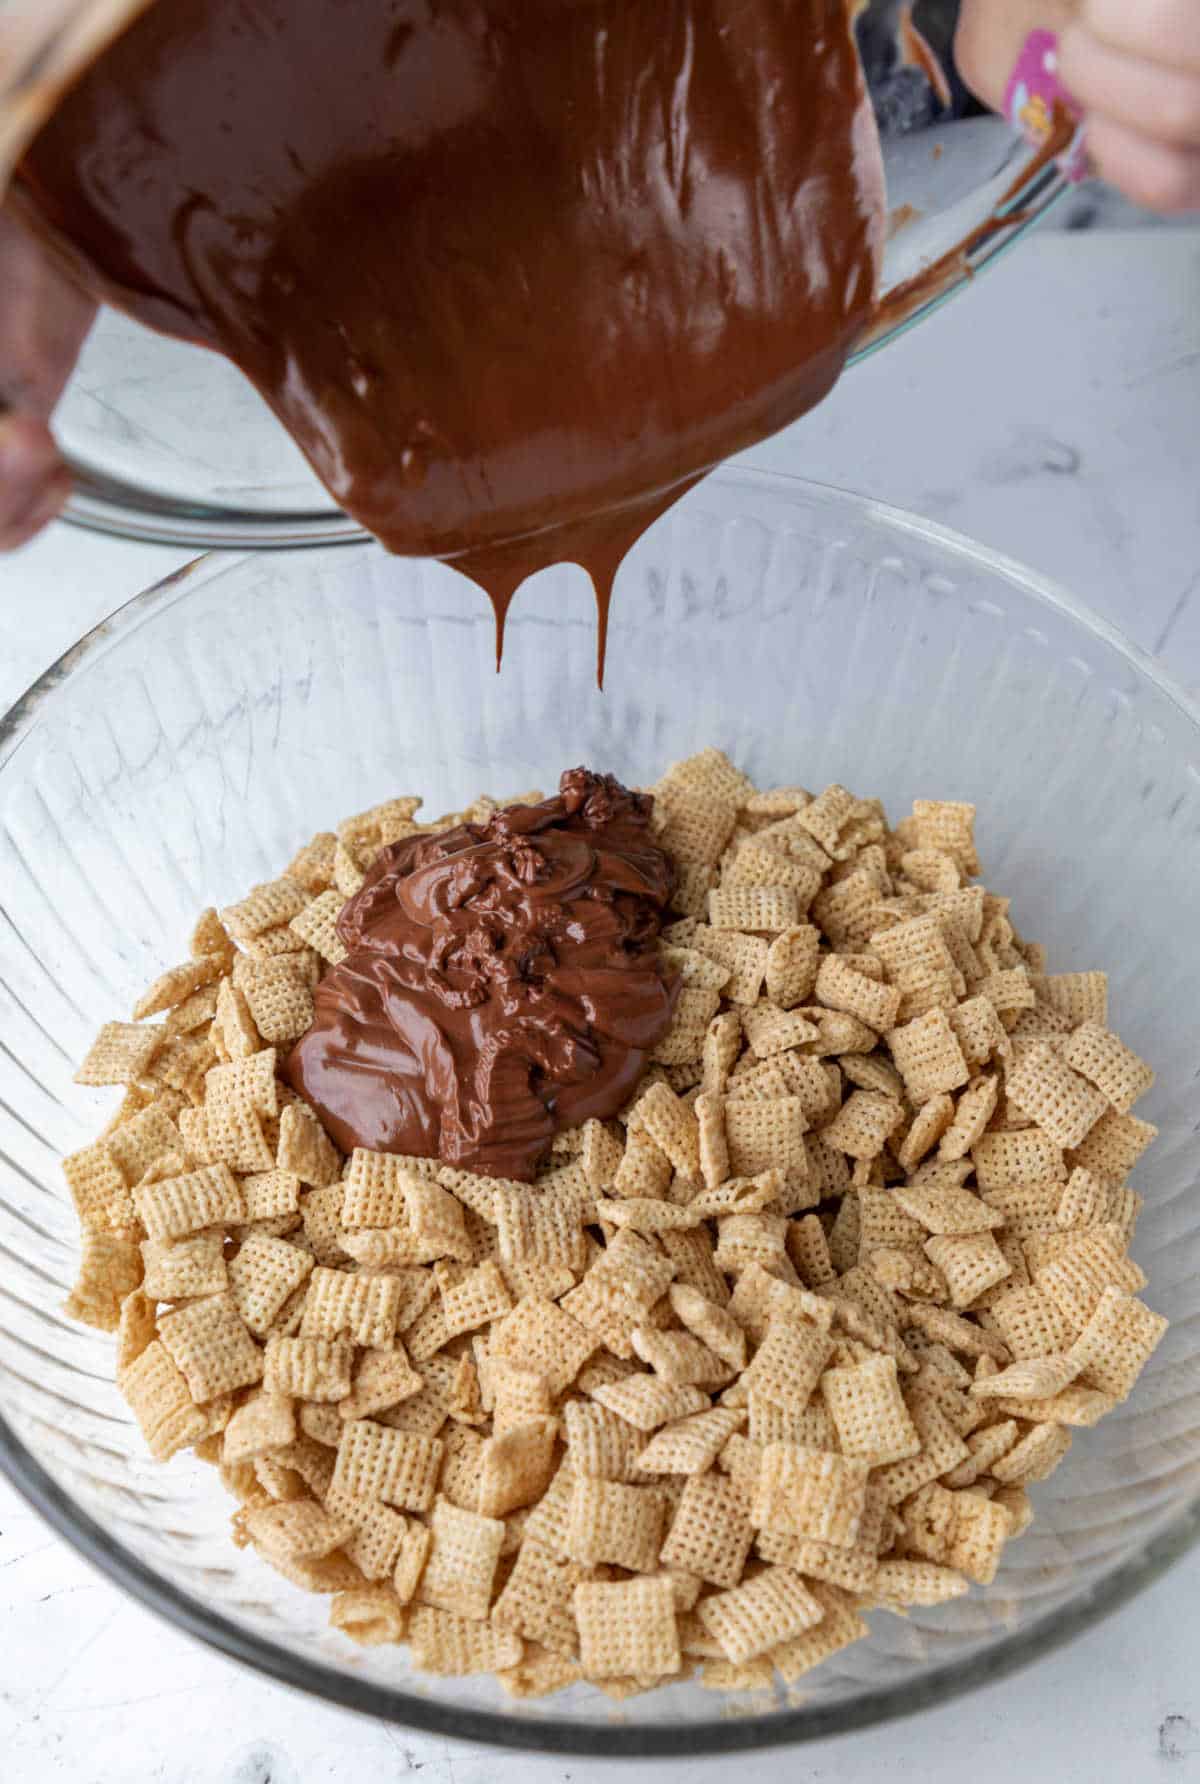 Peanut butter chocolate mixture pouring onto chex cereal. 